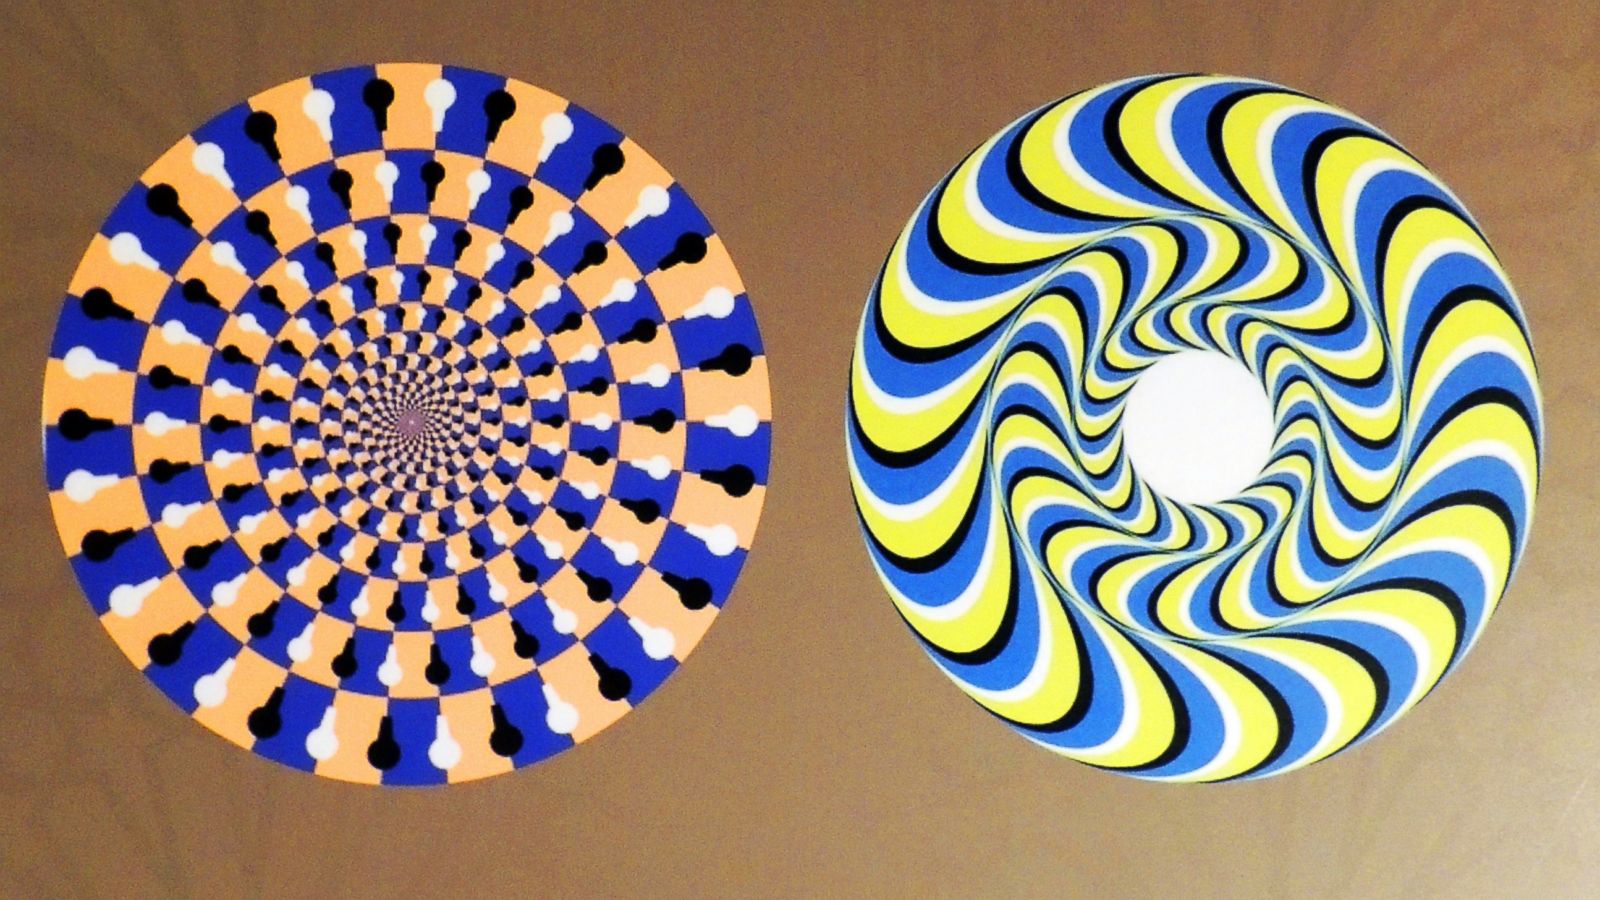 The Dress' Inspires Outpouring of Cool Optical Illusions - Good